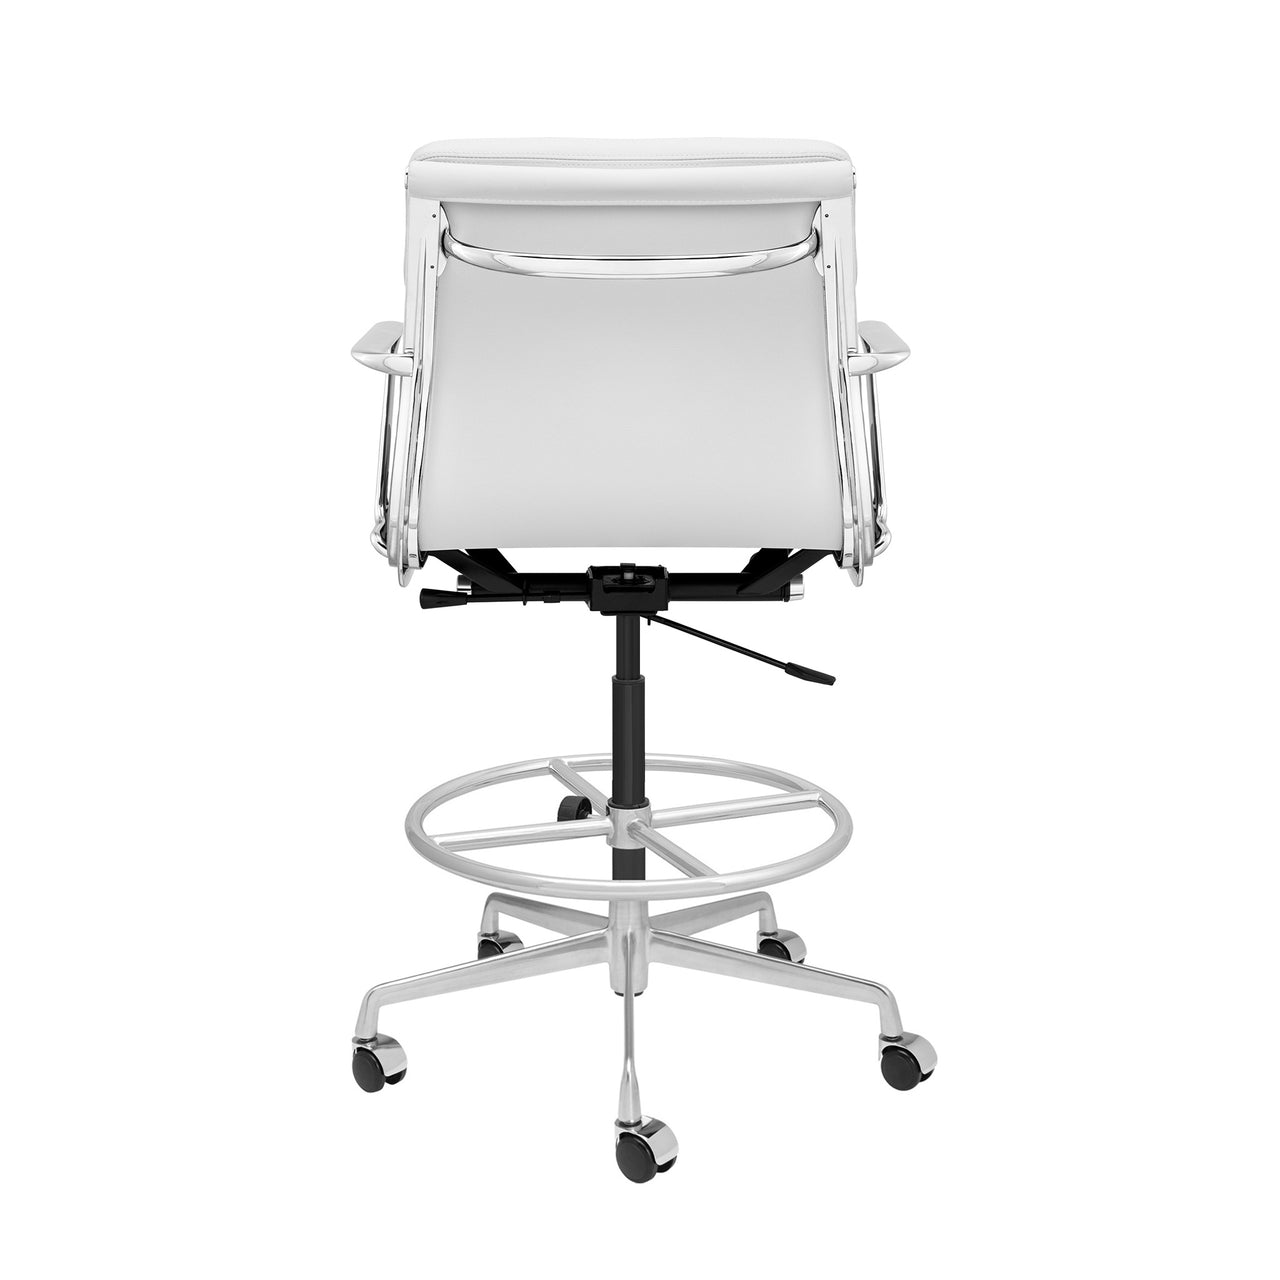 SHIPS FEB 18TH - Pro Soft Pad Drafting Chair (White Italian Leather)